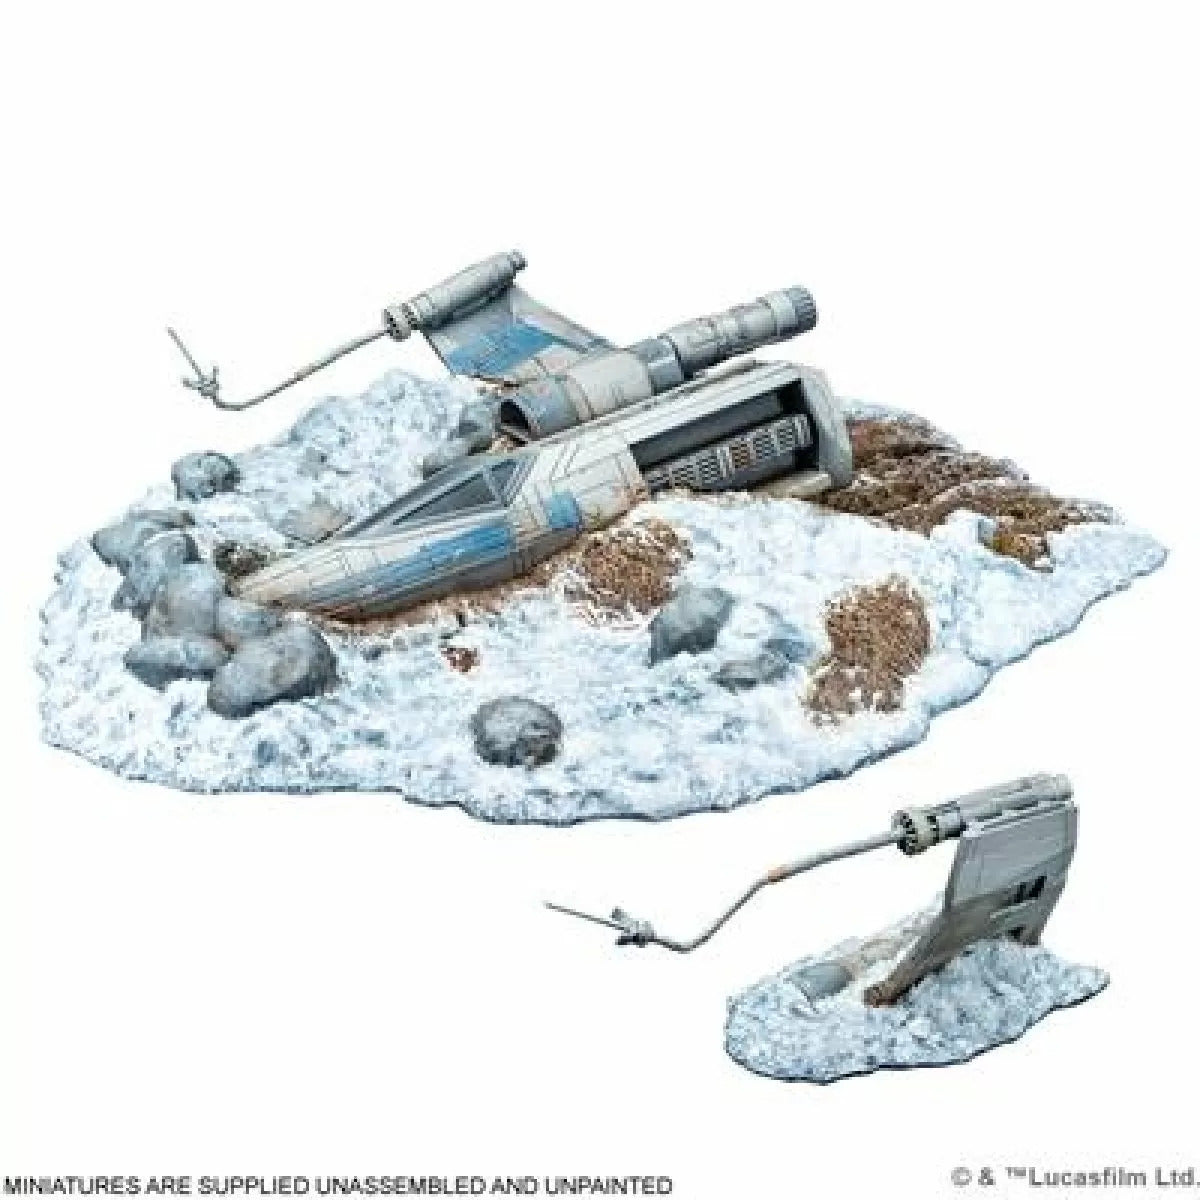 Crashed X-Wing Battlefield Expansion